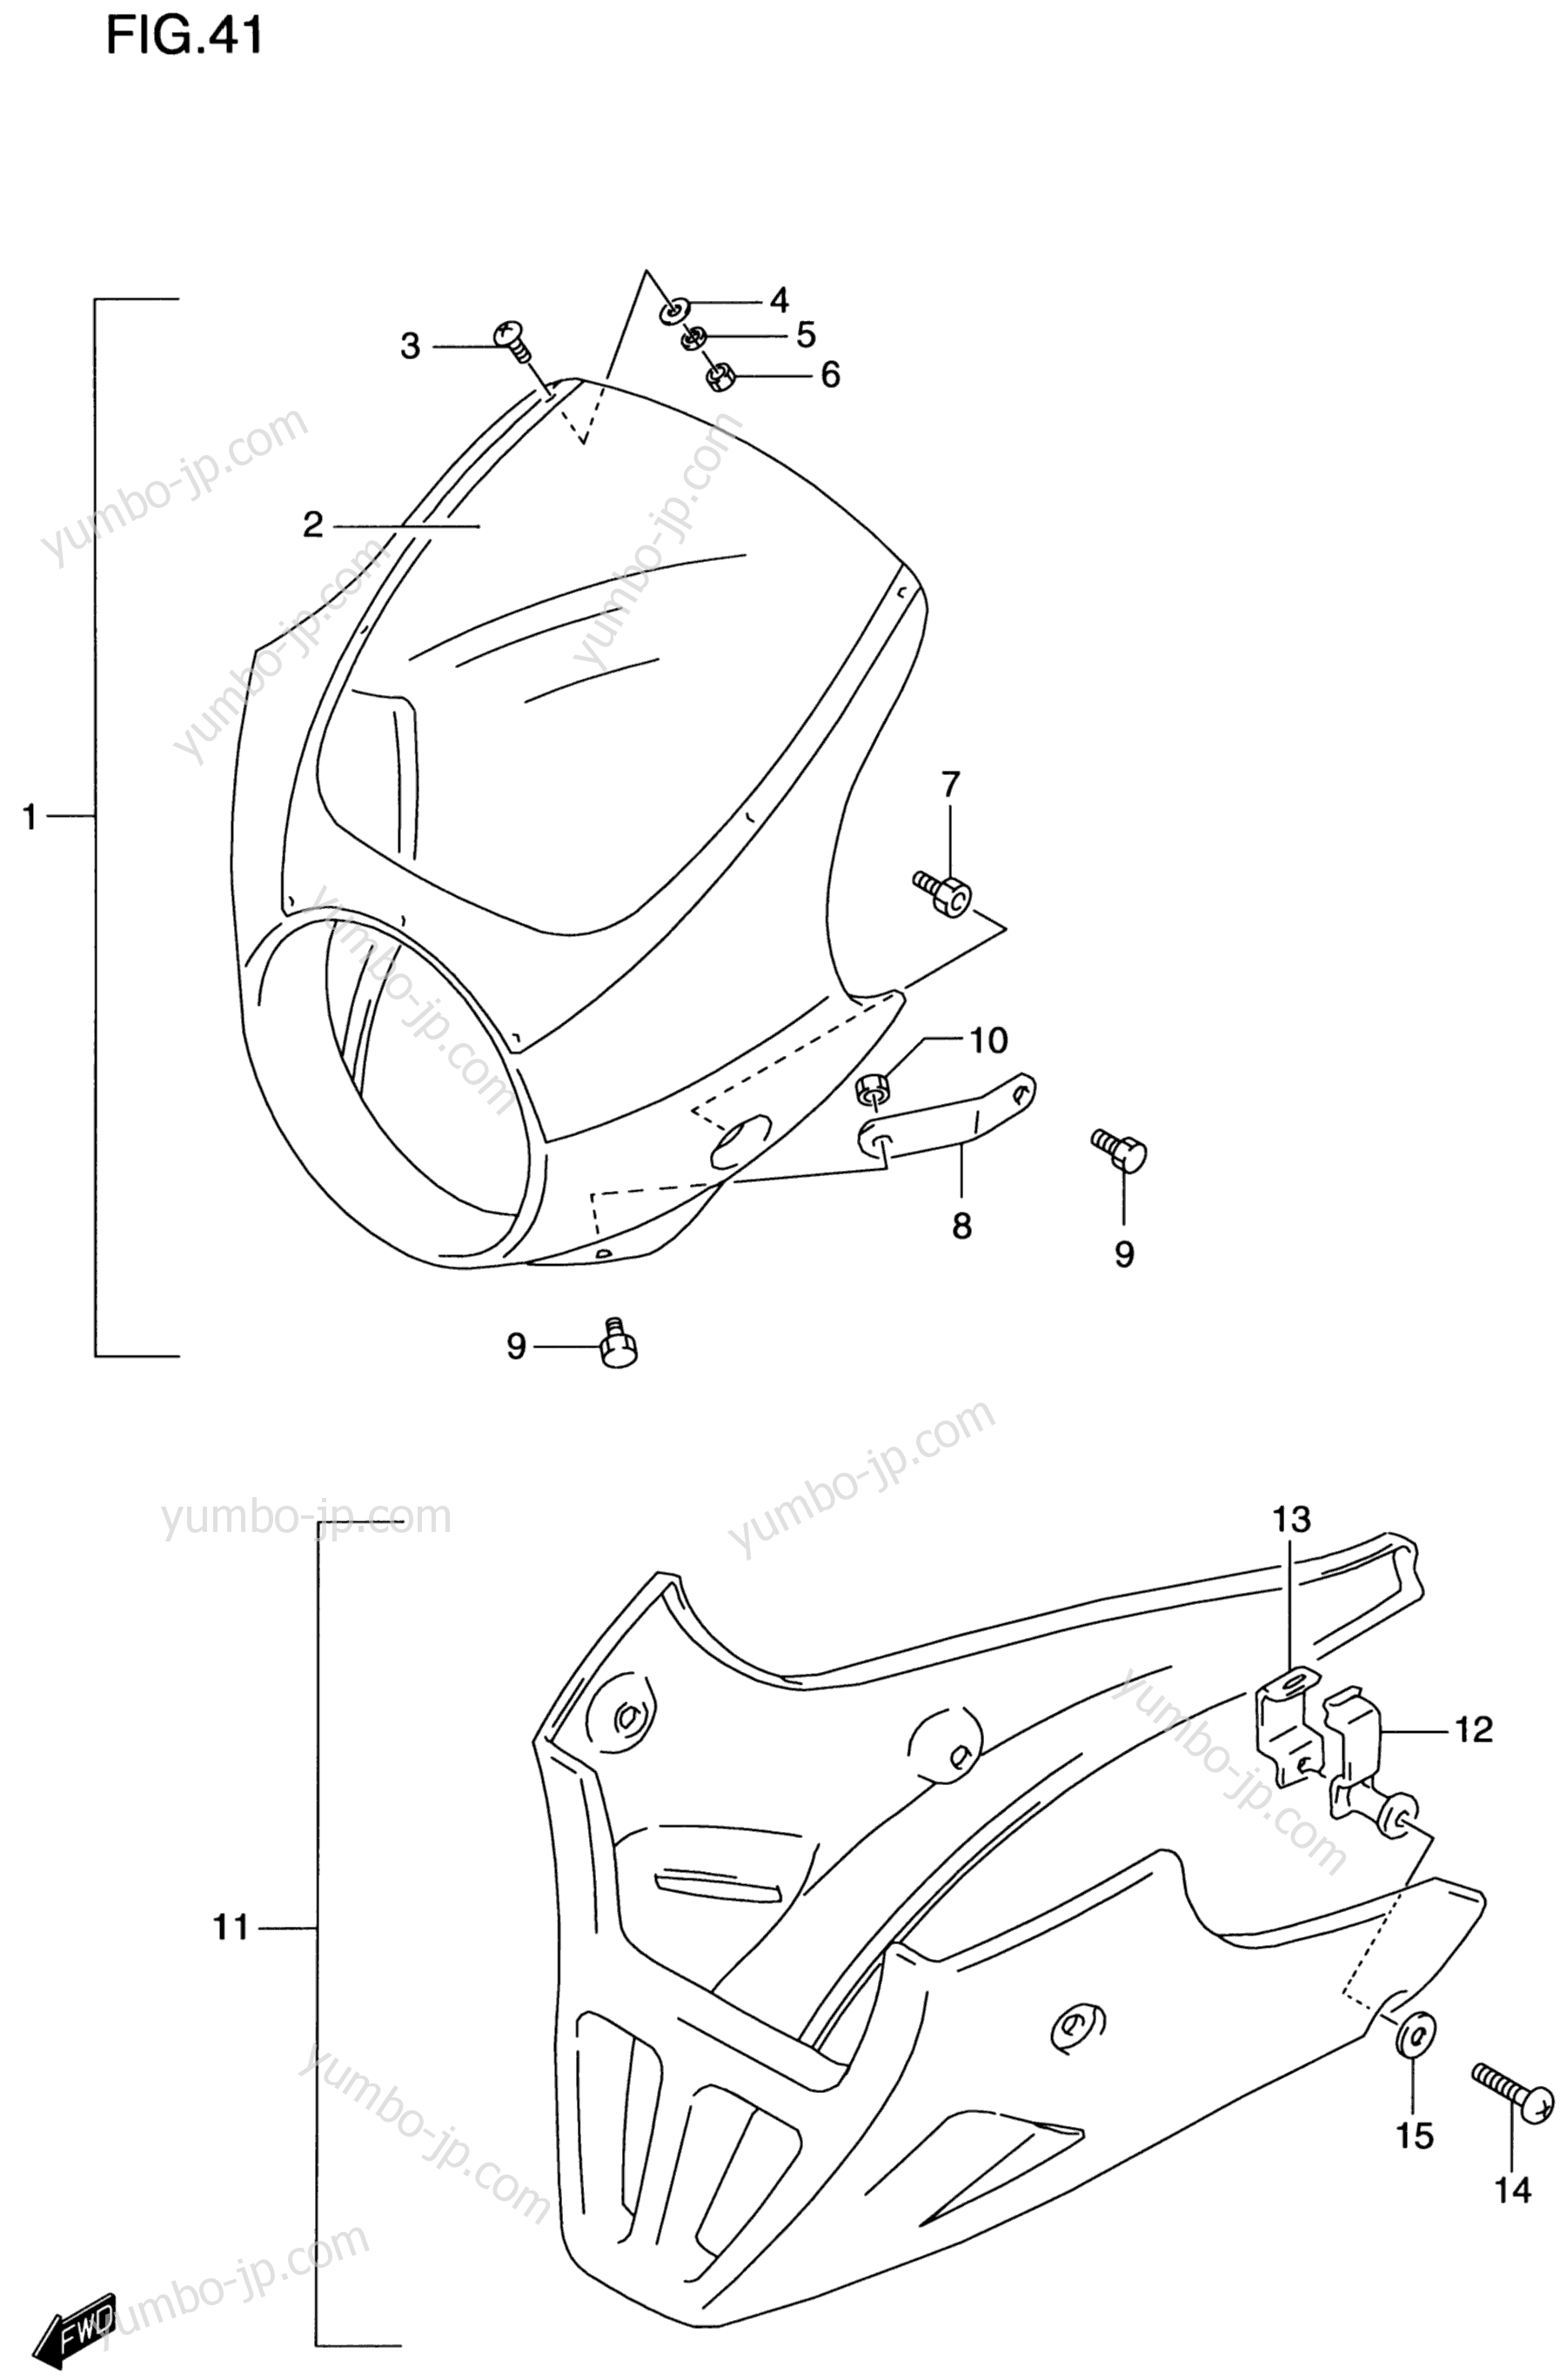 COWLING (OPTIONAL) for motorcycles SUZUKI GS500E 1999 year